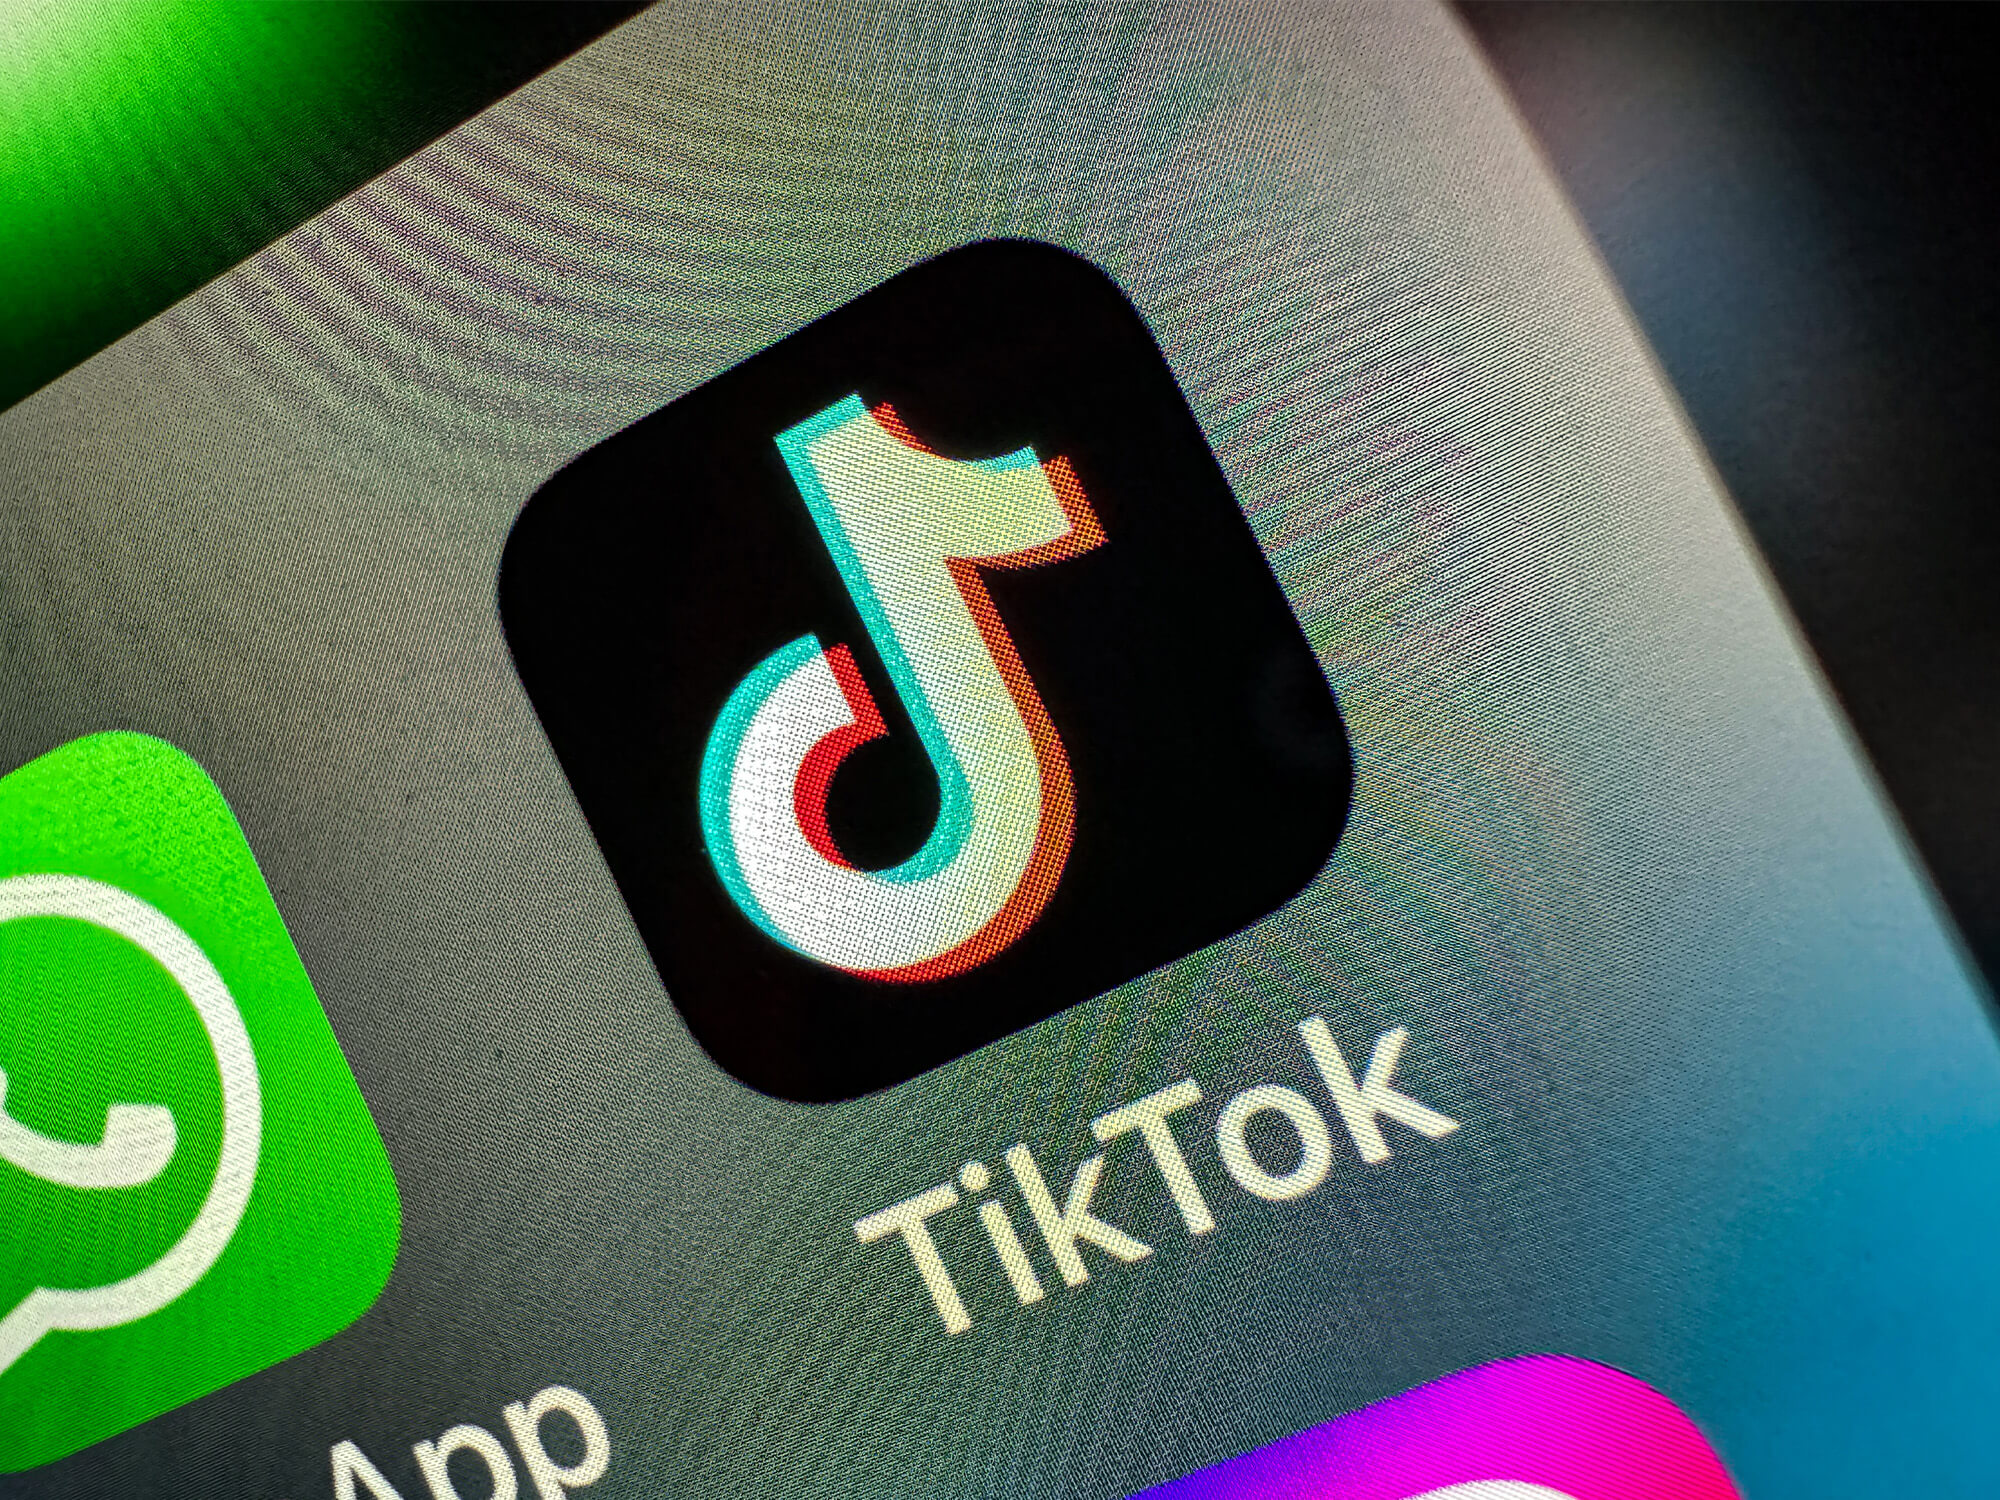 TikTok app icon on a phone screen. It shows a music note graphic on a black background.